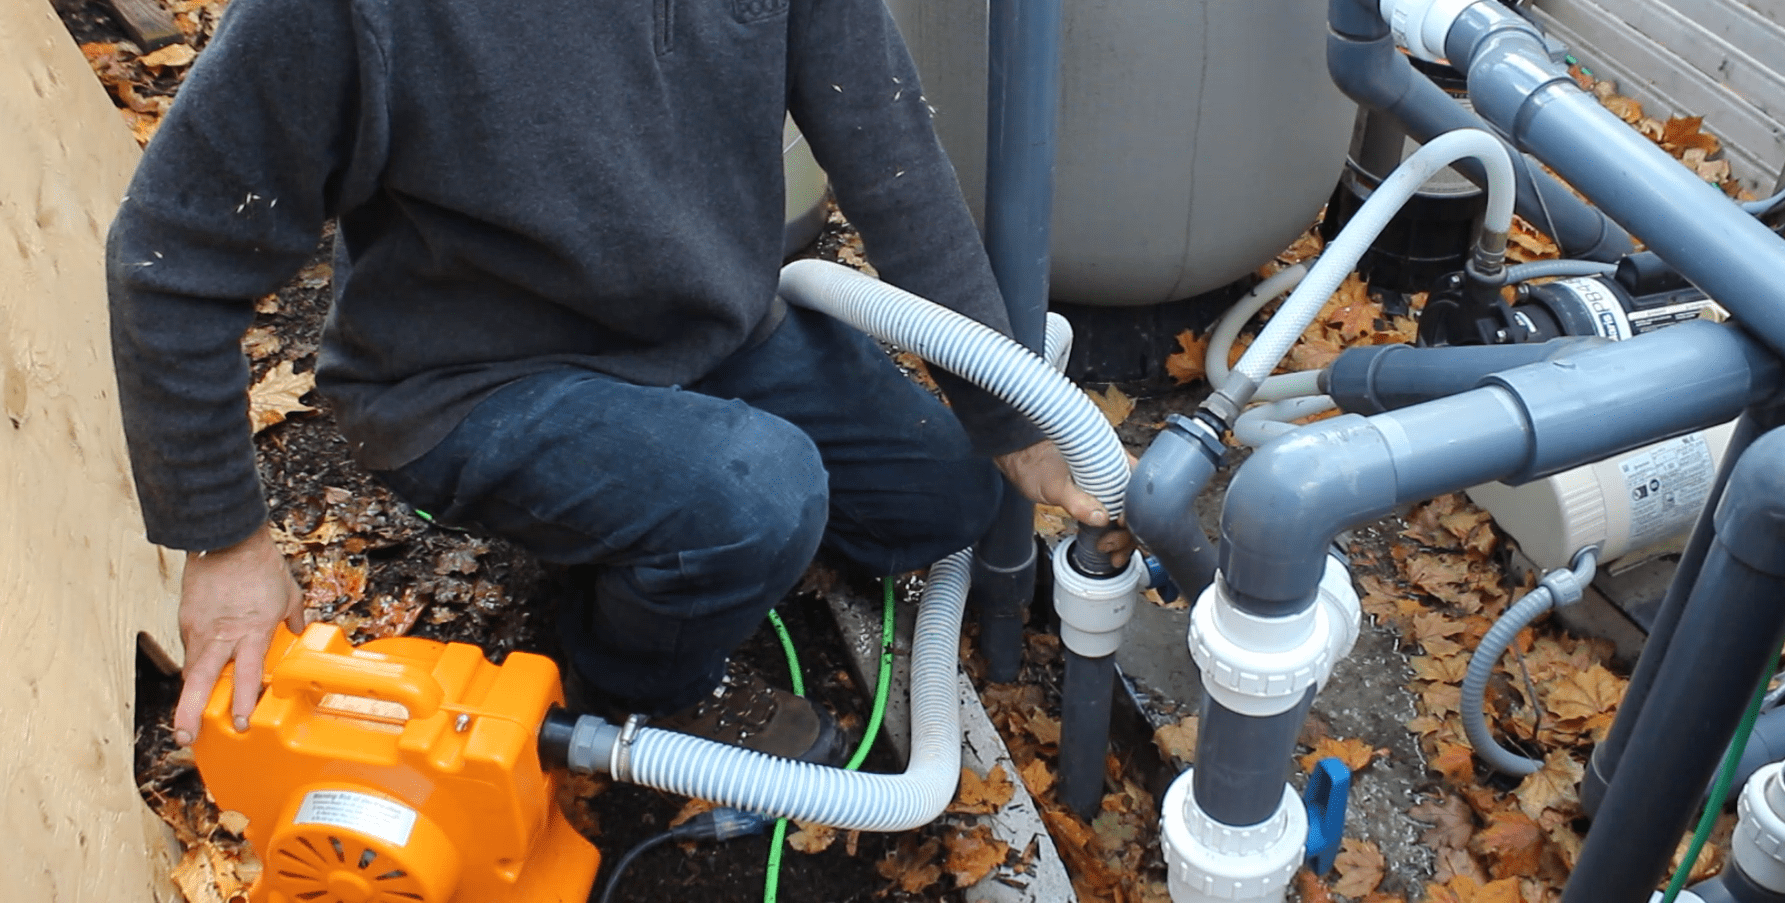 A person is kneeling beside a pool pump and filtration system, surrounded by fallen leaves, adjusting equipment outdoors.